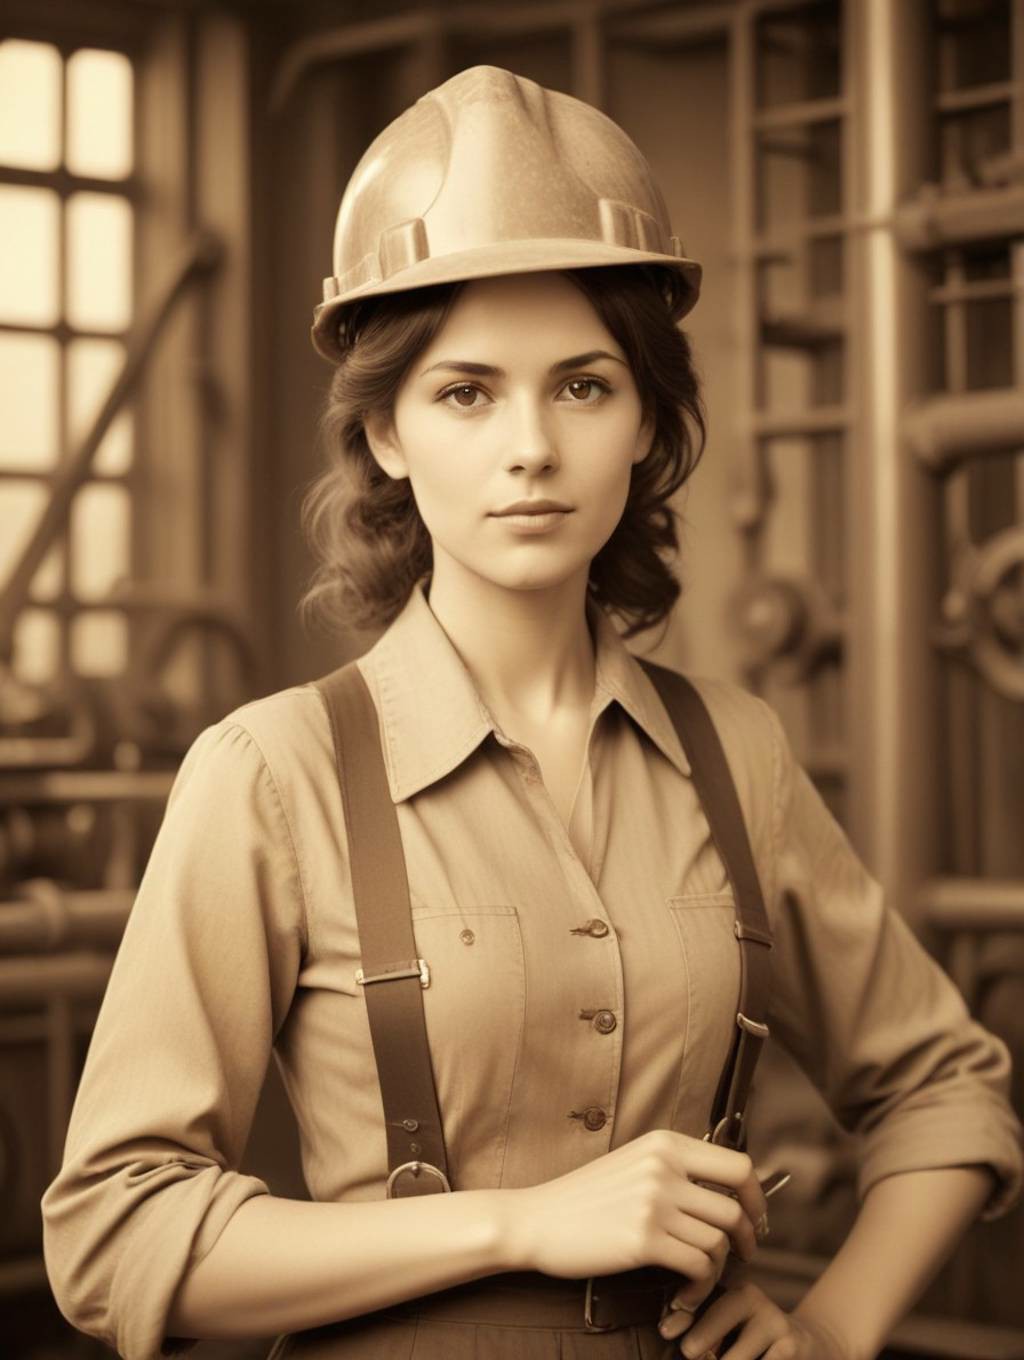 Engineers Women: Gallery Frames & Portrait Photography-Theme:1